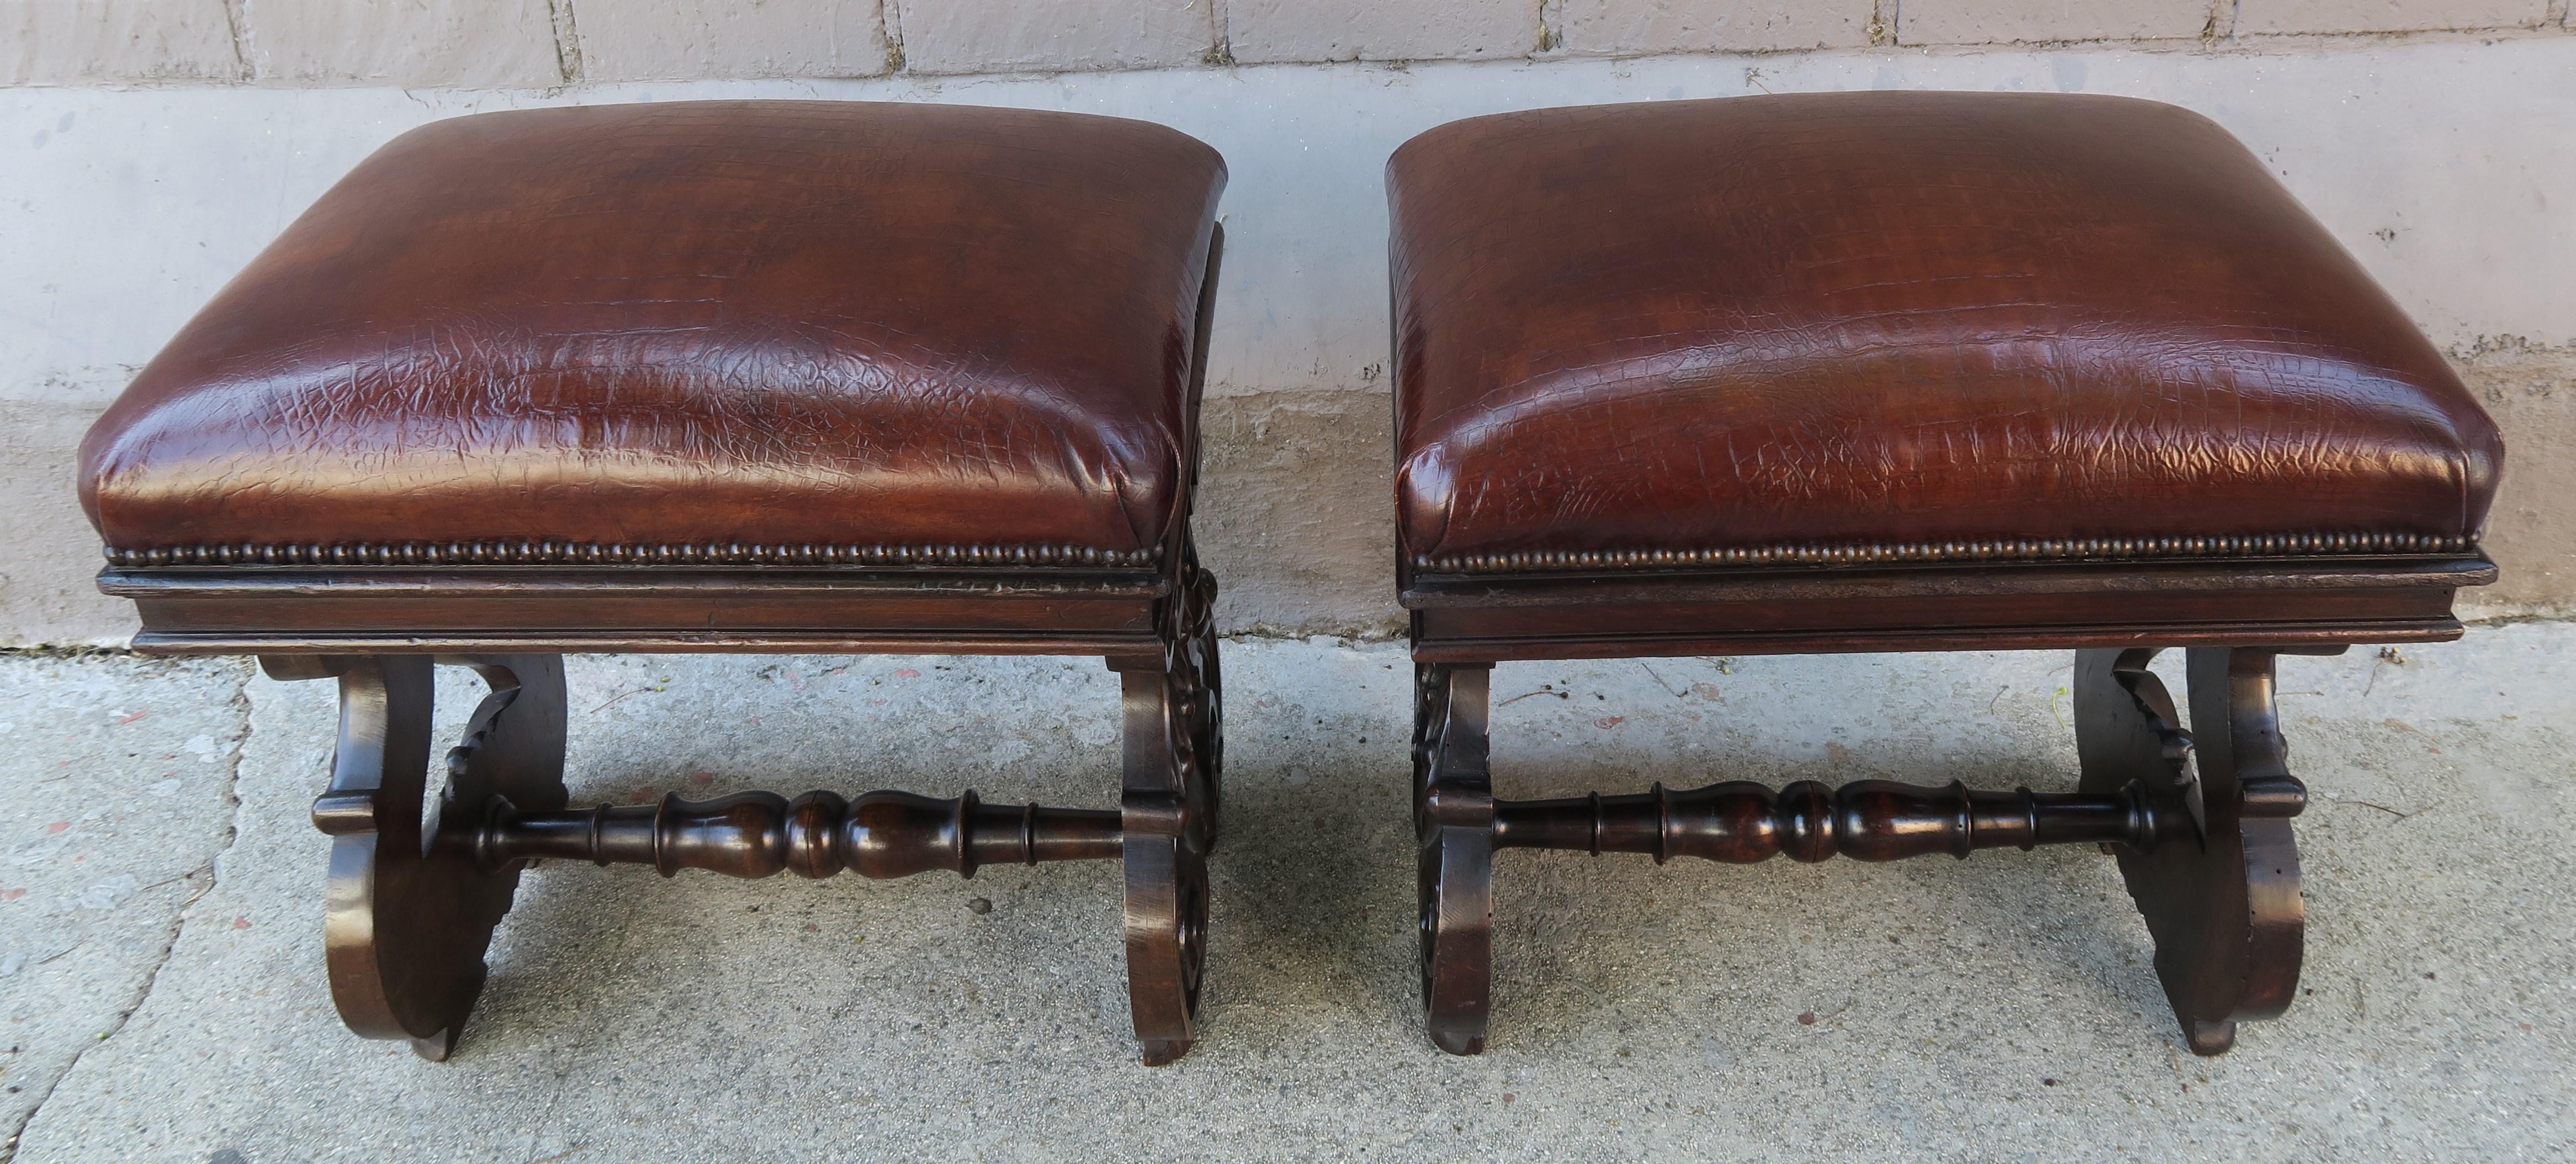 Renaissance 19th Century Pair of Italian Walnut Embossed Leather Benches